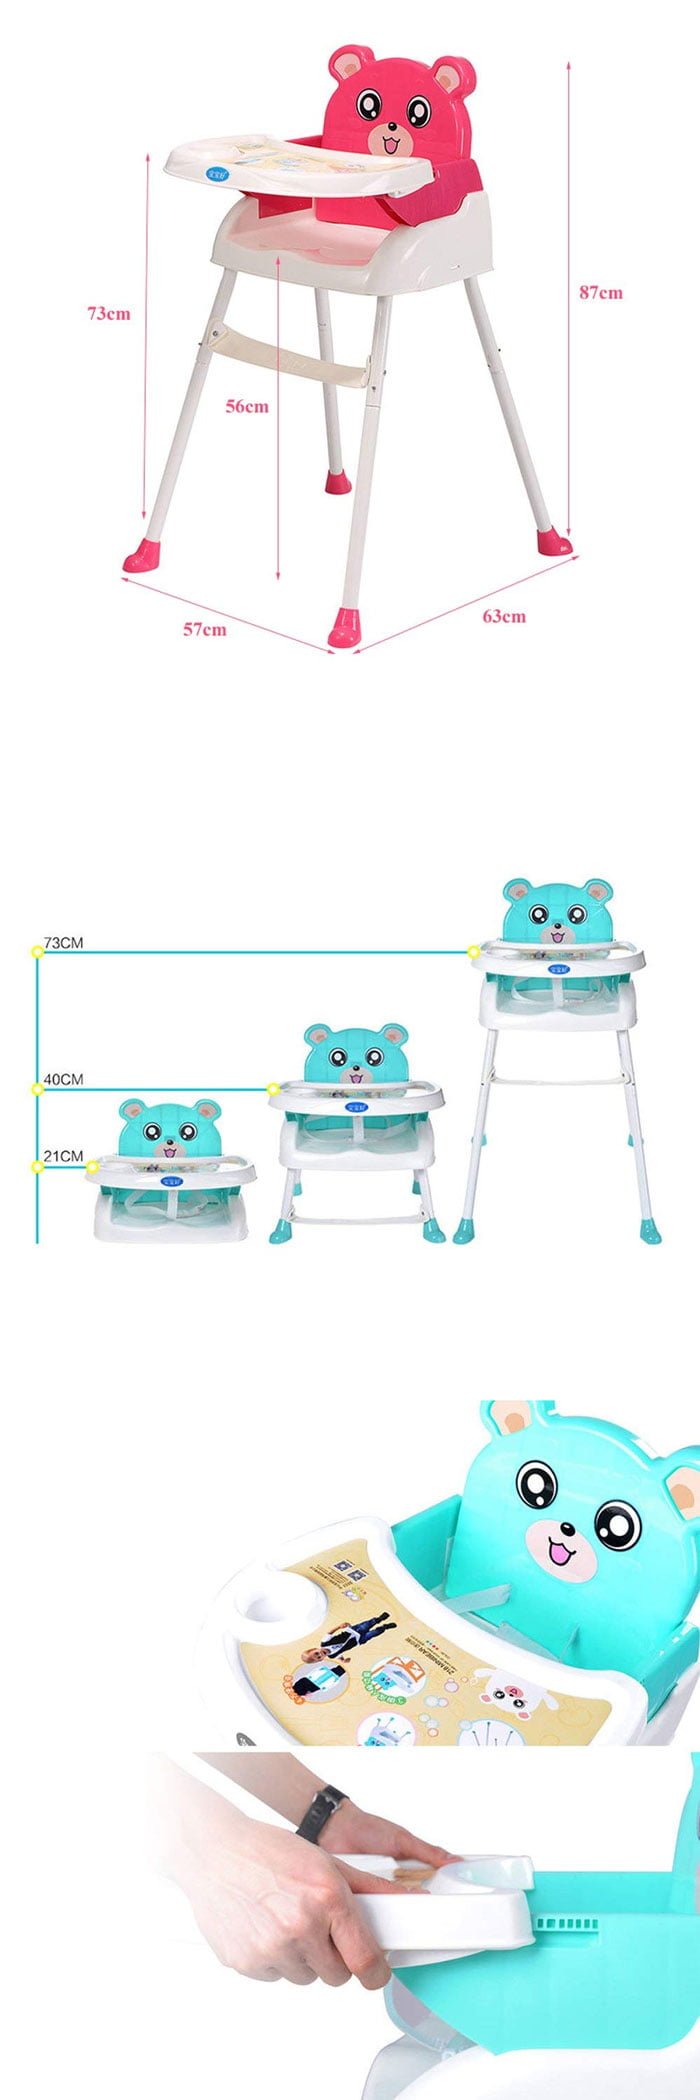 4 in1 Baby High Chair Convertible Toddler Table Seat Booster Infant Feeding Chair